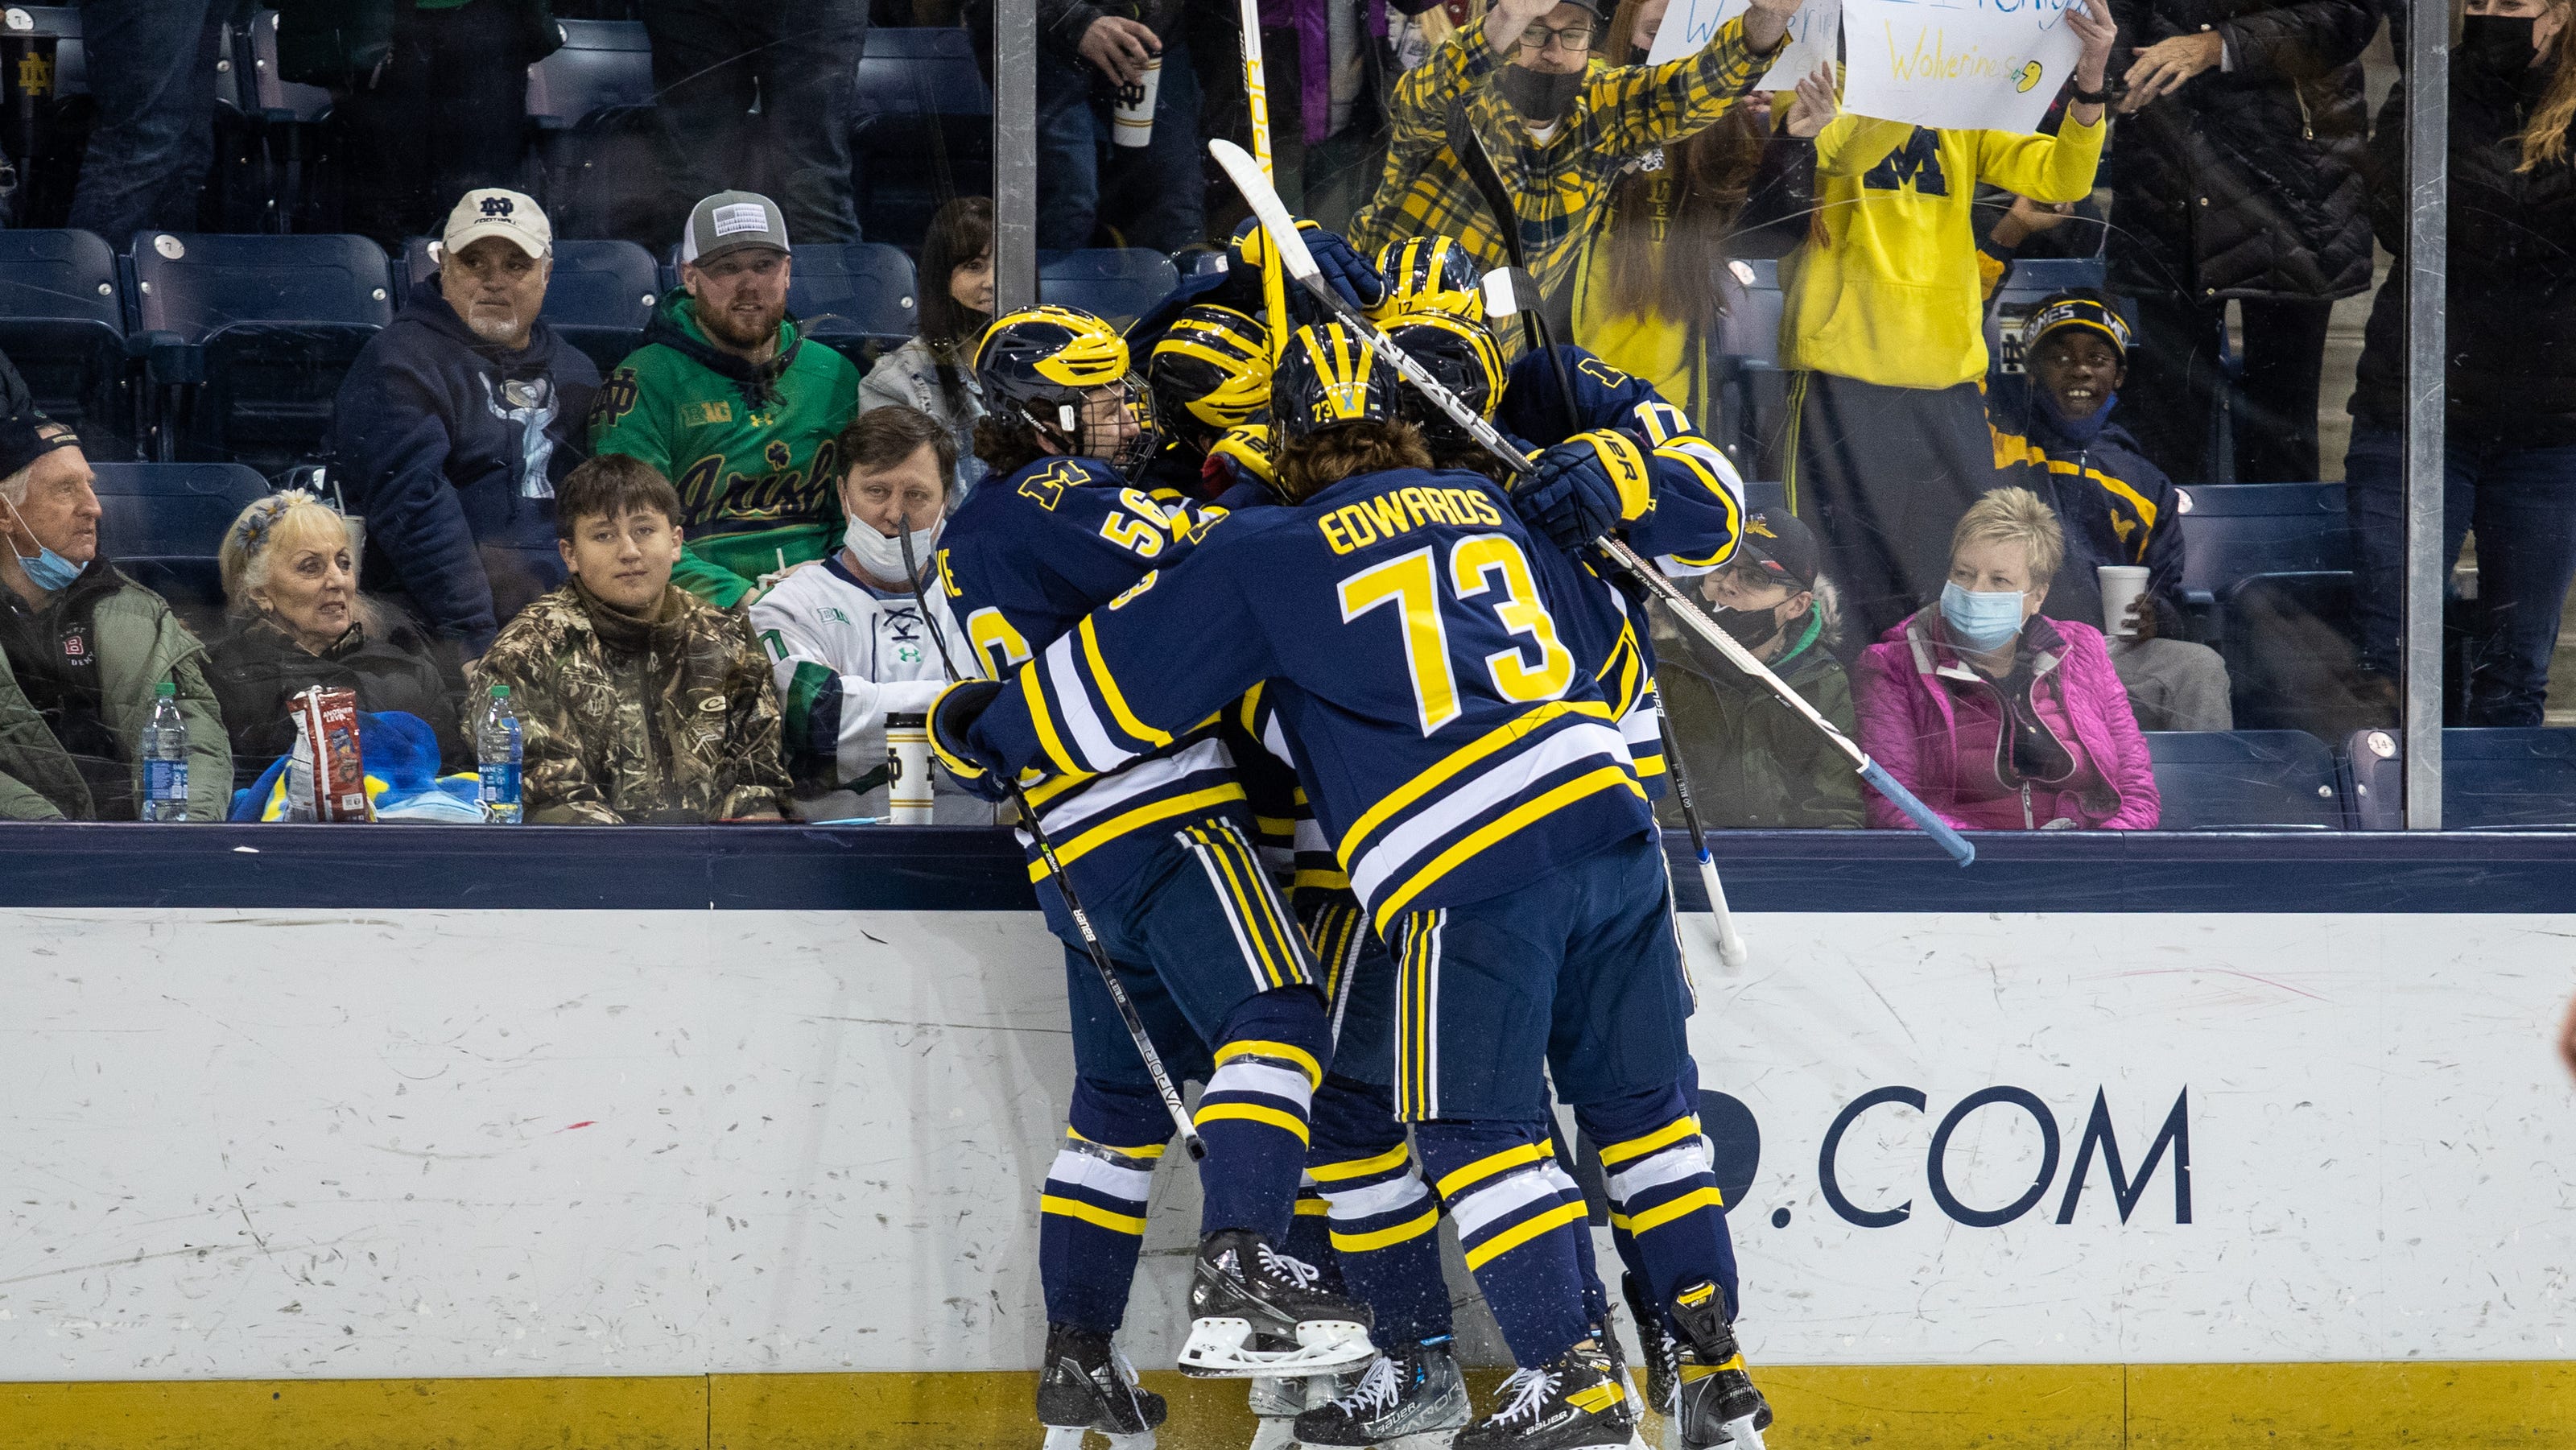 Michigan hockey is No. 1 overall seed in NCAA tournament; WMU a 1seed